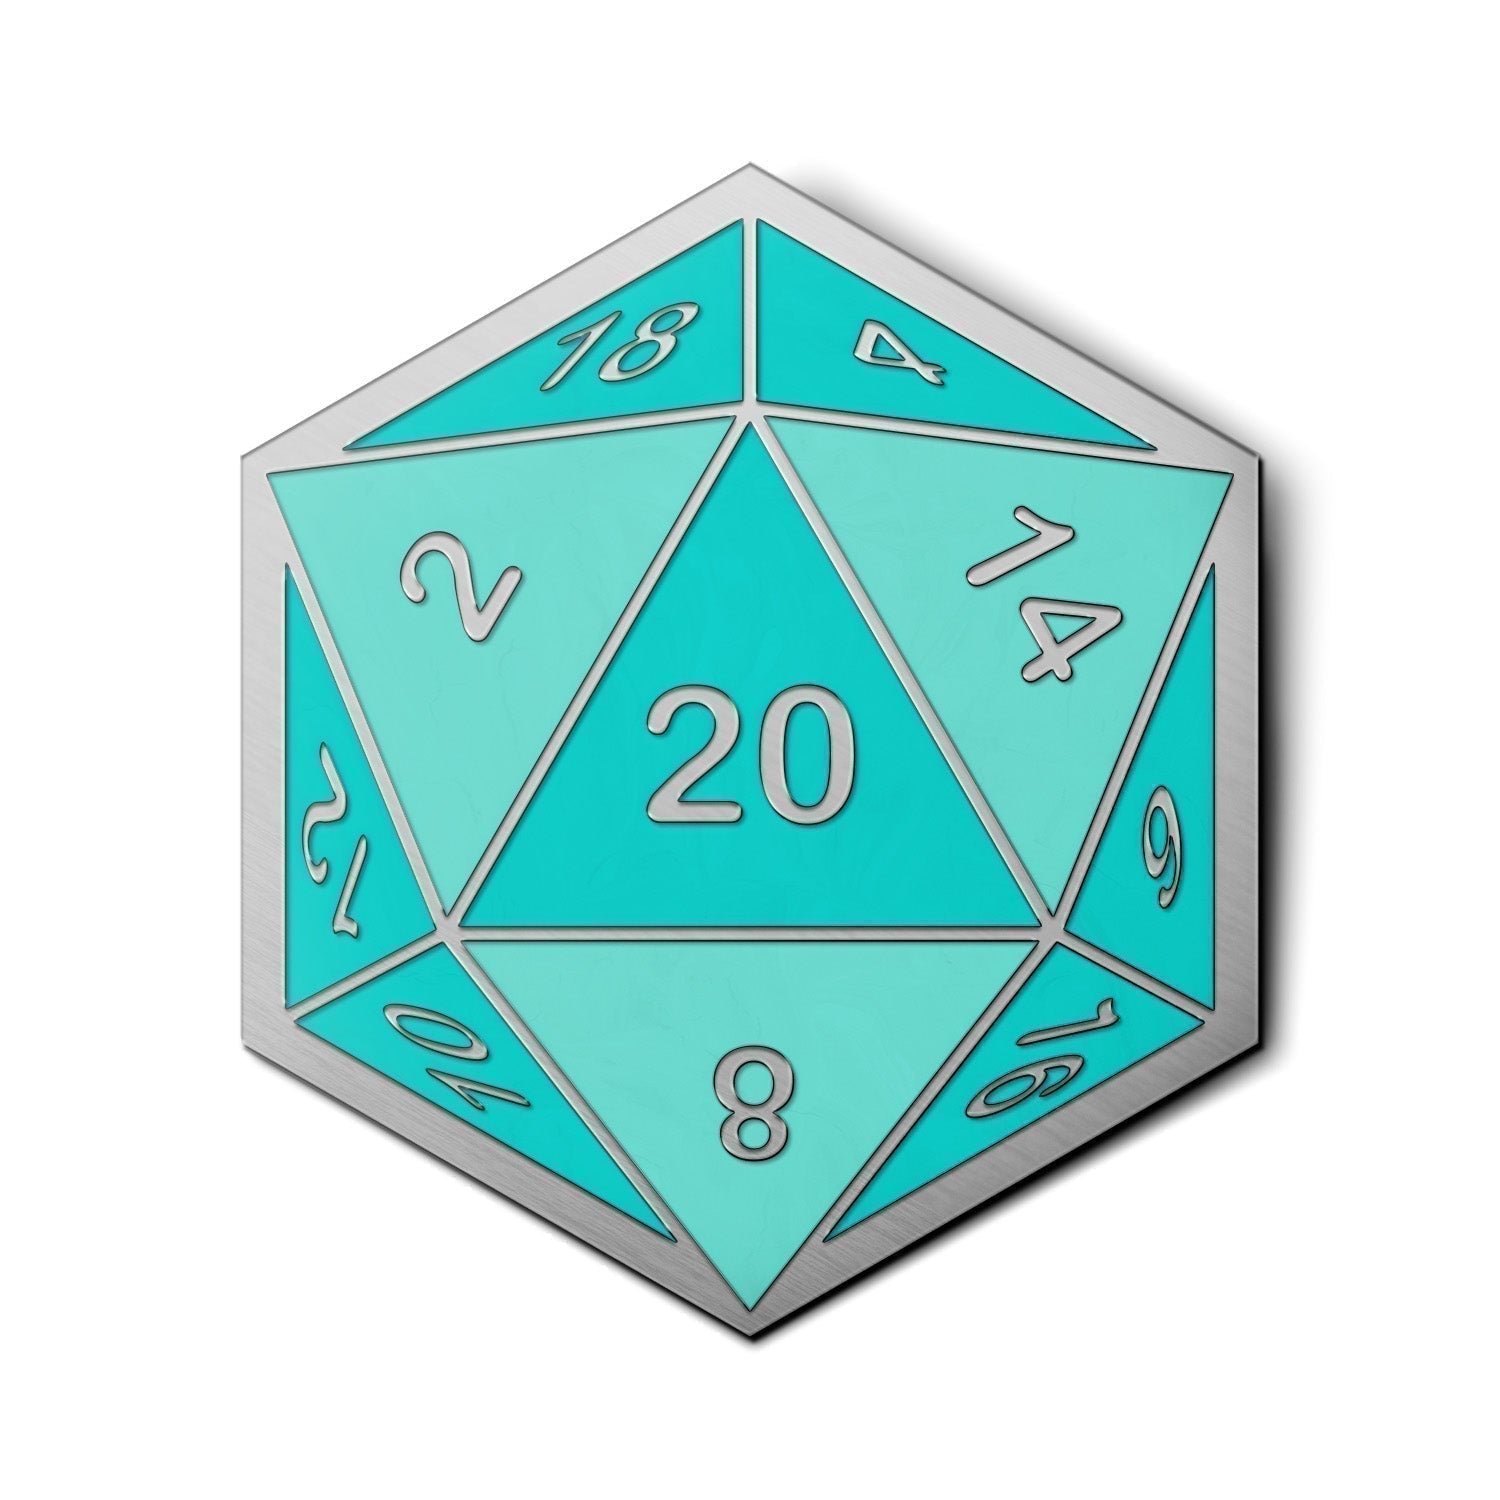 D20 Dice Die - Hard Enamel Adventure Dice Pin Metal by Norse Foundry - NOR 03679_Parent